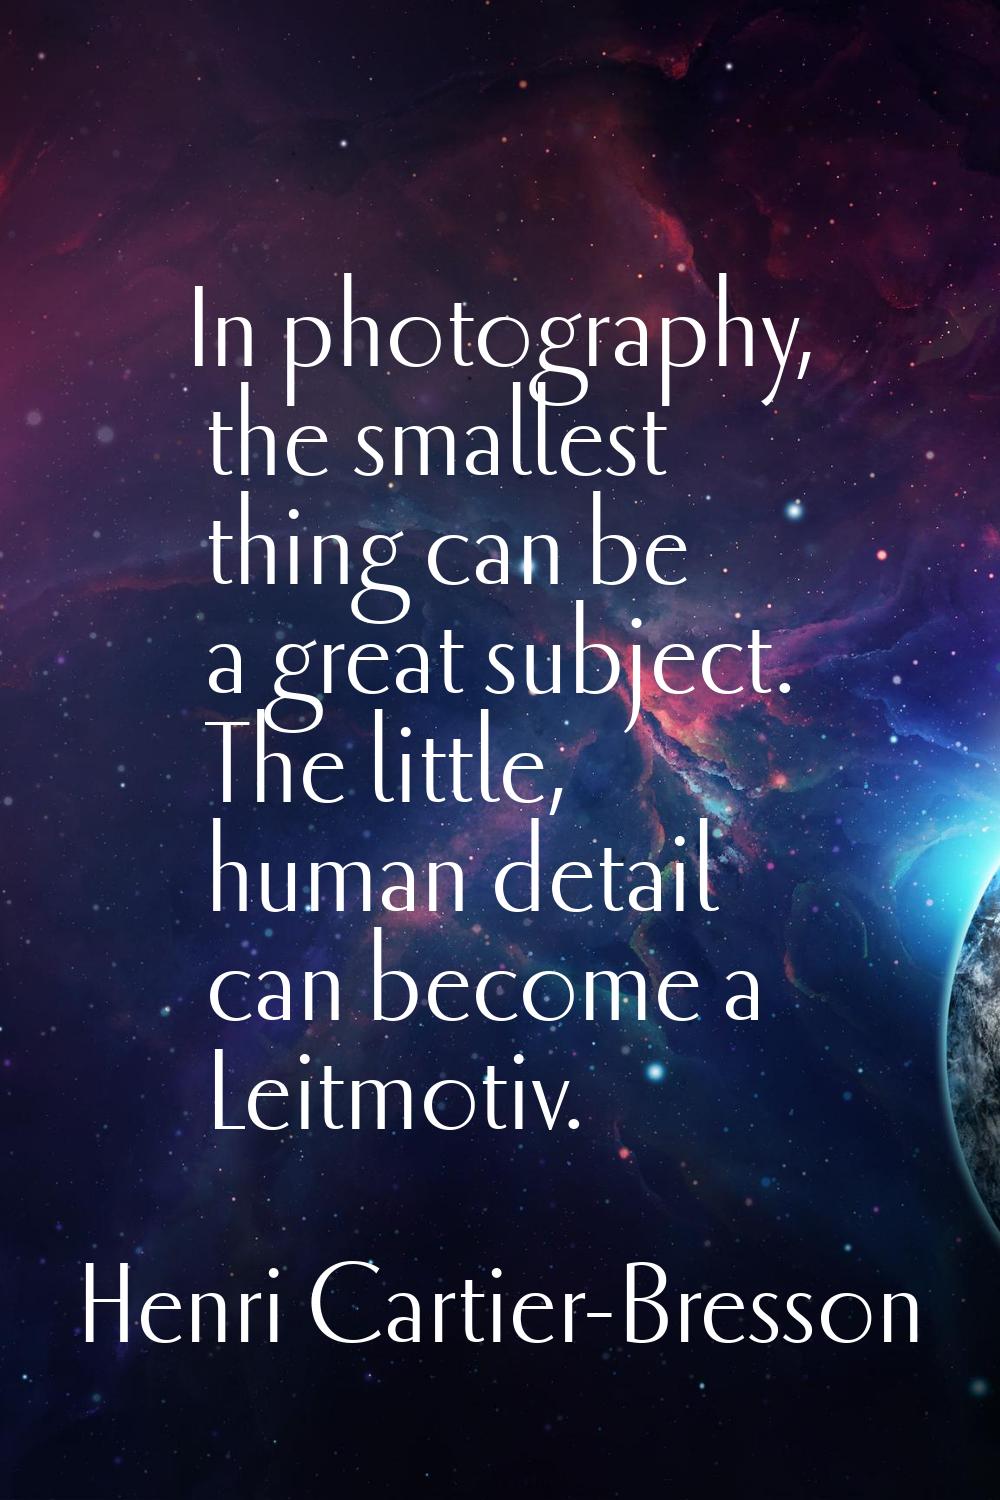 In photography, the smallest thing can be a great subject. The little, human detail can become a Le